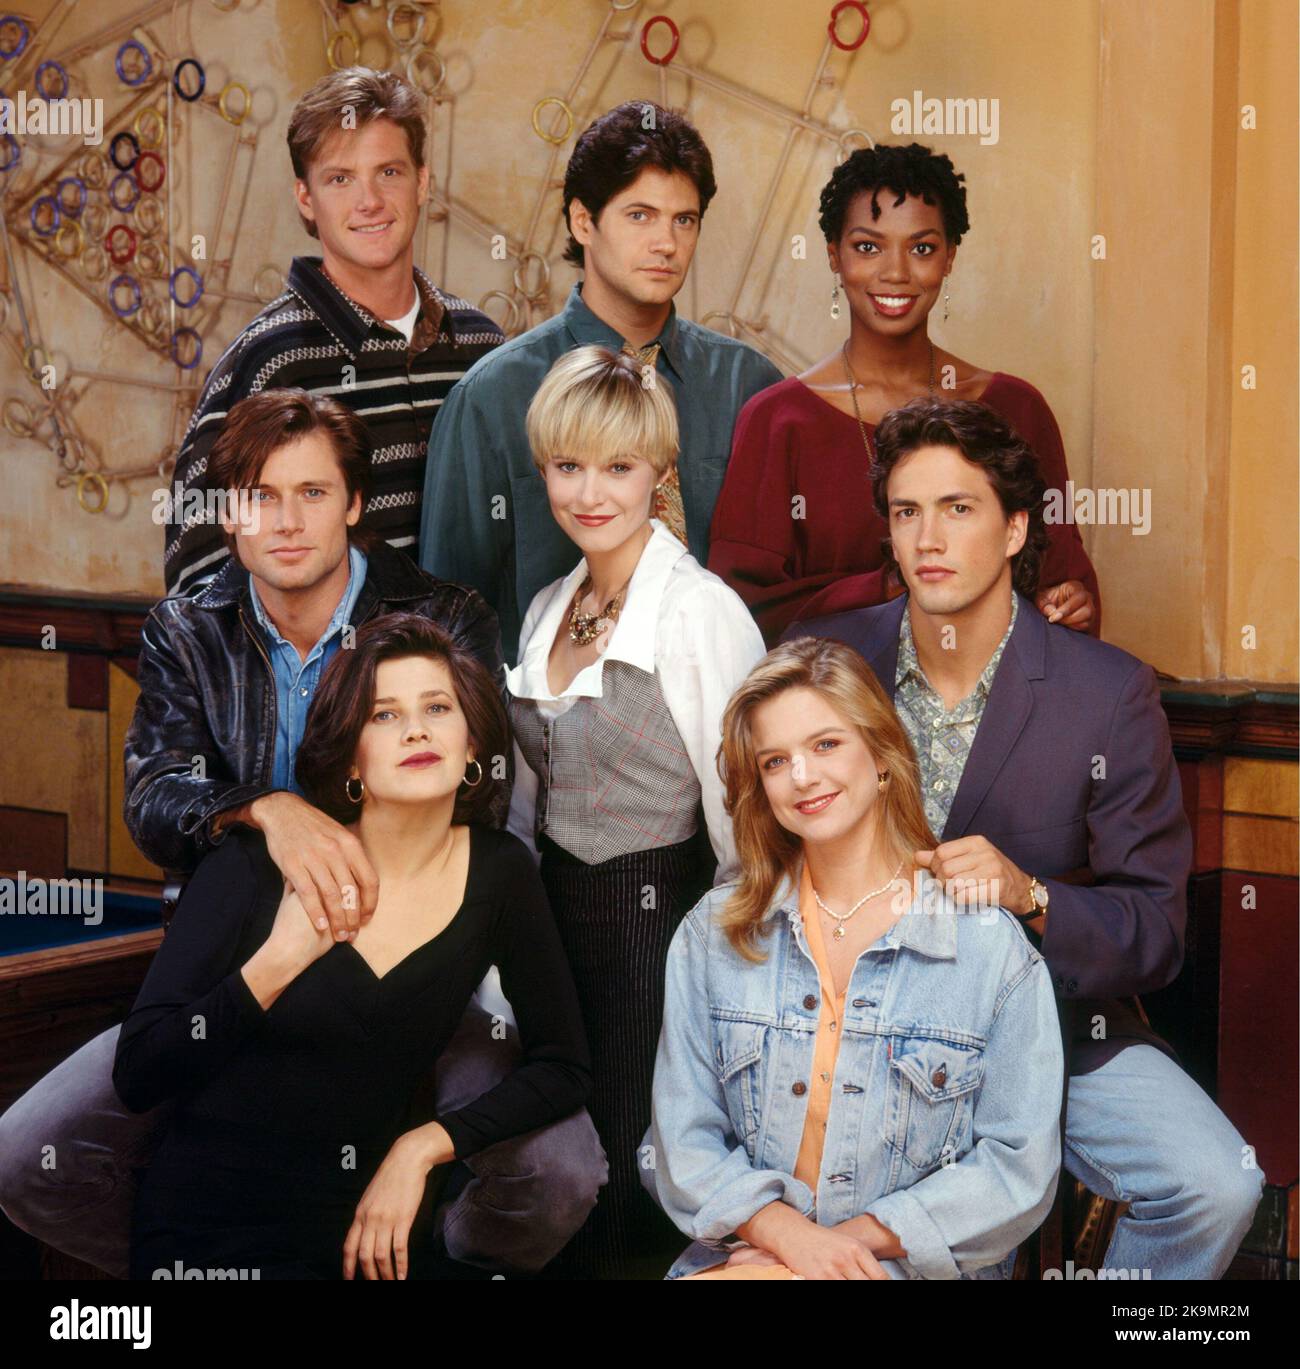 DAPHNE ZUNIGA, ANDREW SHUE, VANESSA WILLIAMS, COURTNEY THORNE-SMITH, DOUG SAVANT, GRANT SHOW, THOMAS CALABRO and JOSIE BISSETT in MELROSE PLACE (1992), directed by ANSON WILLIAMS, RICHARD LANG and CHARLES CORRELL. Credit: FOX TELEVISION NETWORK/SPELLING TELEVISION / Album Stock Photo